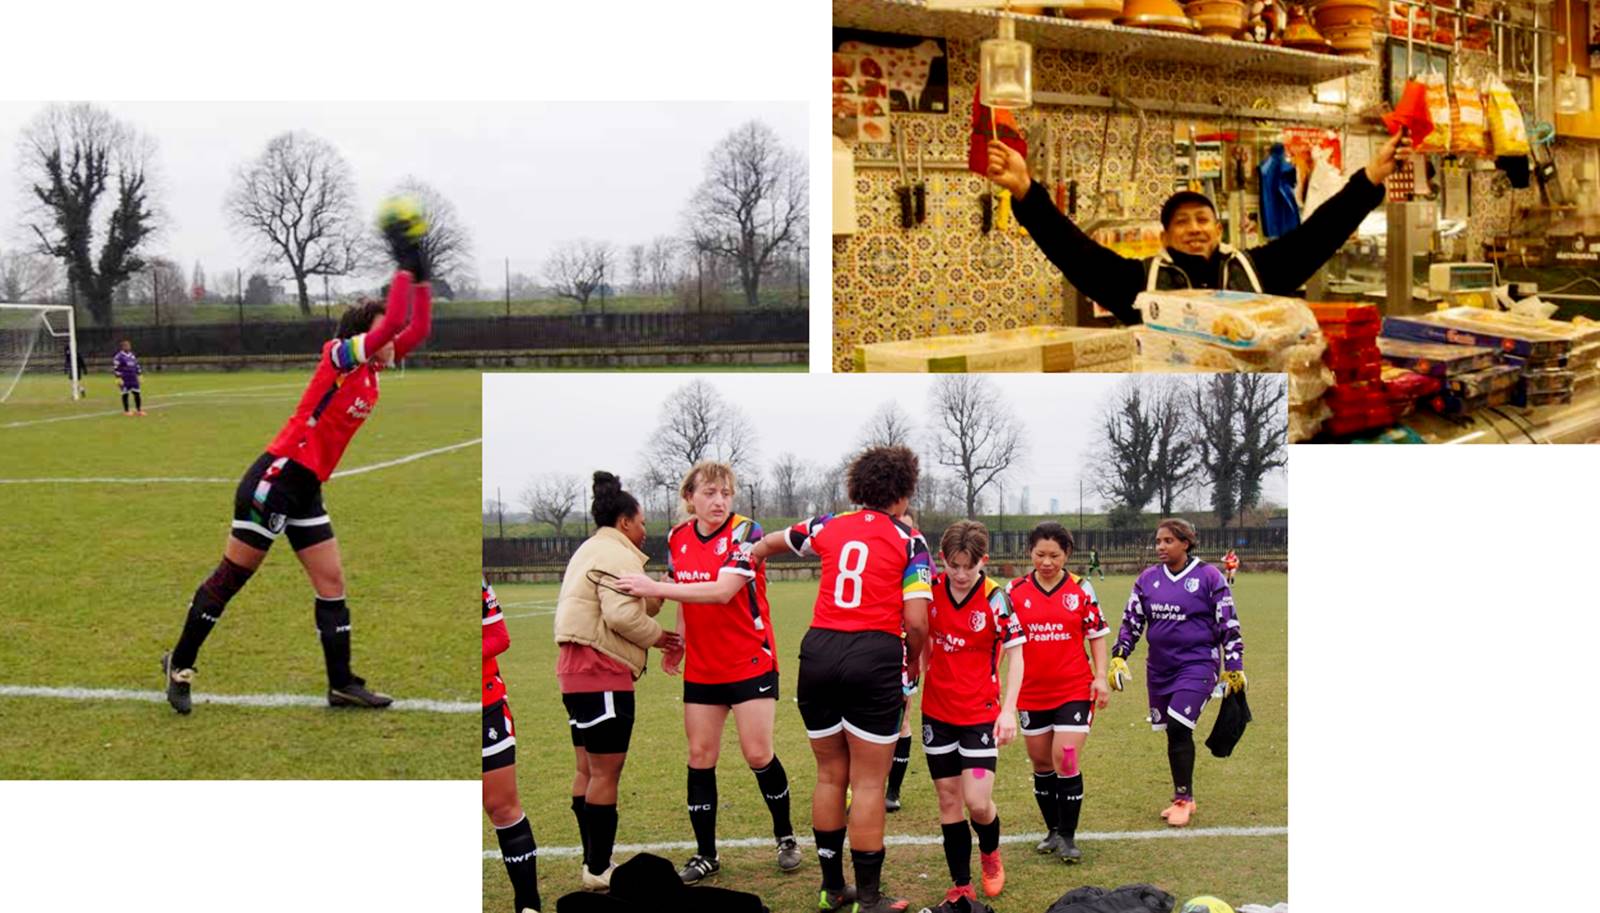 Football and connections
(from left) Hackney Women’s FC’s right-back takes a throw; the players during a match with Brentford, March 2023; and a shopkeeper with team flags on the 2022-23 World Cup semi-finals. ©Josh Bland
A collage of three photos, the extreme left showing Hackney Women’s FC’s right-back throwing the ball, the middle with the team taking a break during half-time and the third photo of a shopkeeper holding up team flags on the 2022-23 World Cup semi-finals between Morocco and France. 